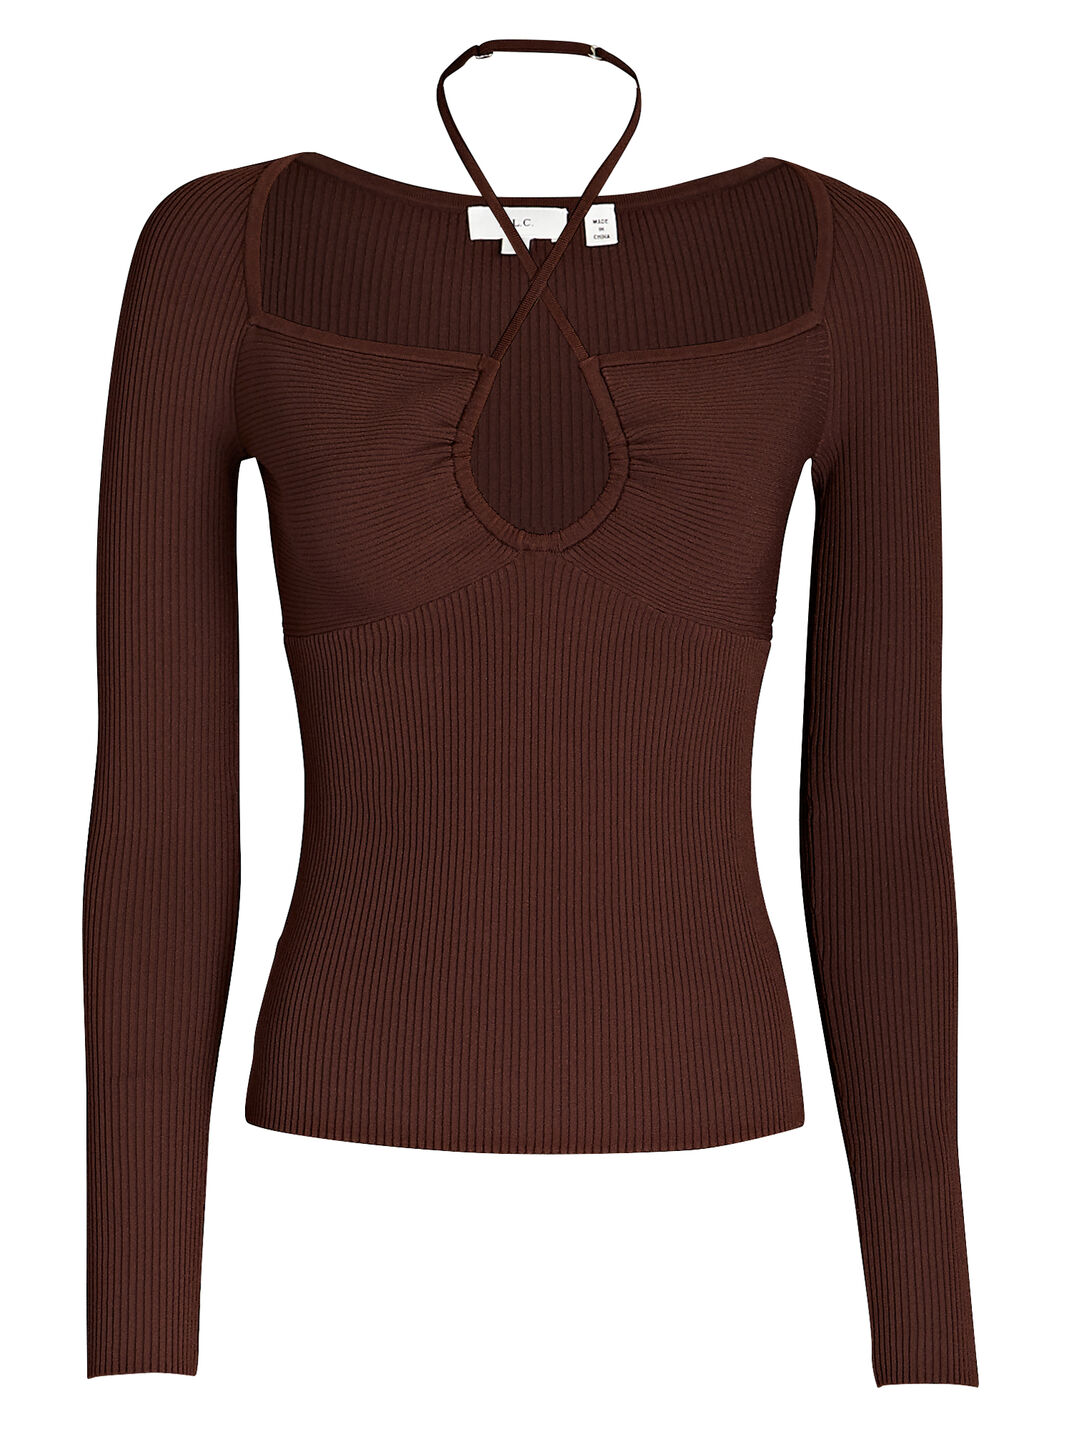 Annabelle Cross-Front Rib Knit Top